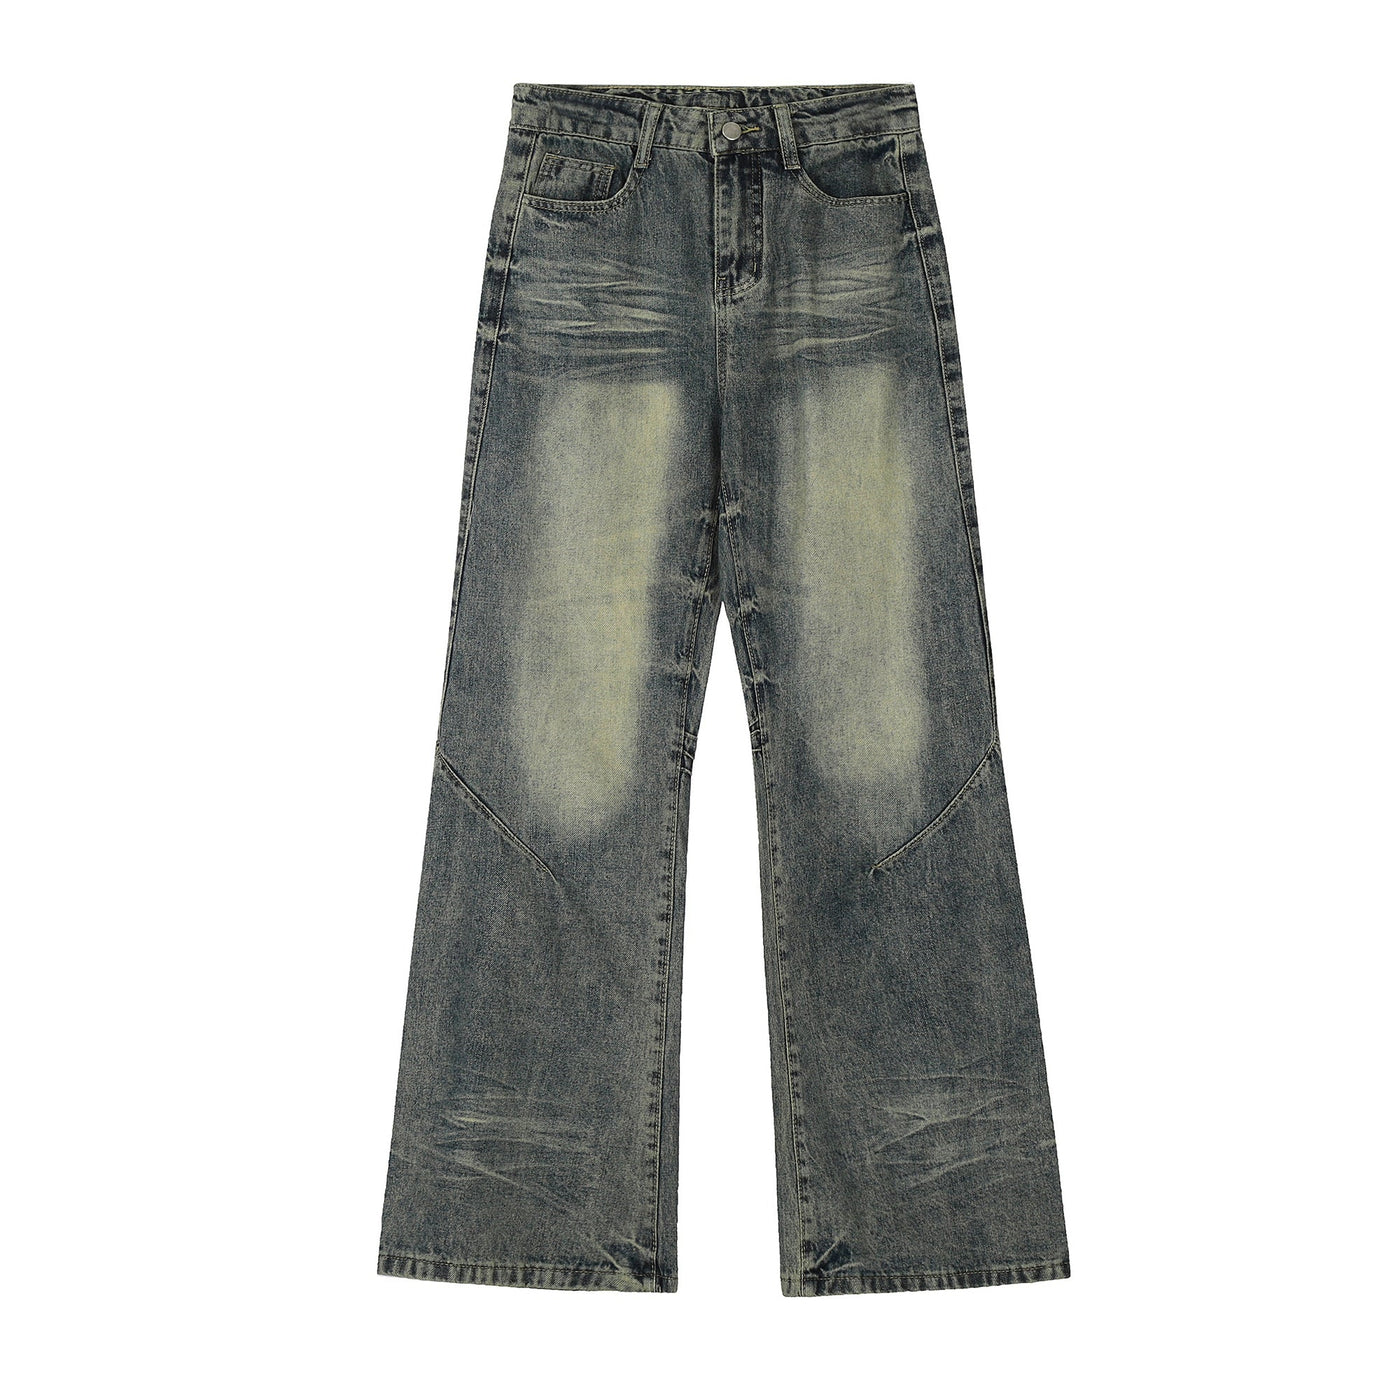 Fade Washed Bootcut Jeans Korean Street Fashion Jeans By Blacklists Shop Online at OH Vault